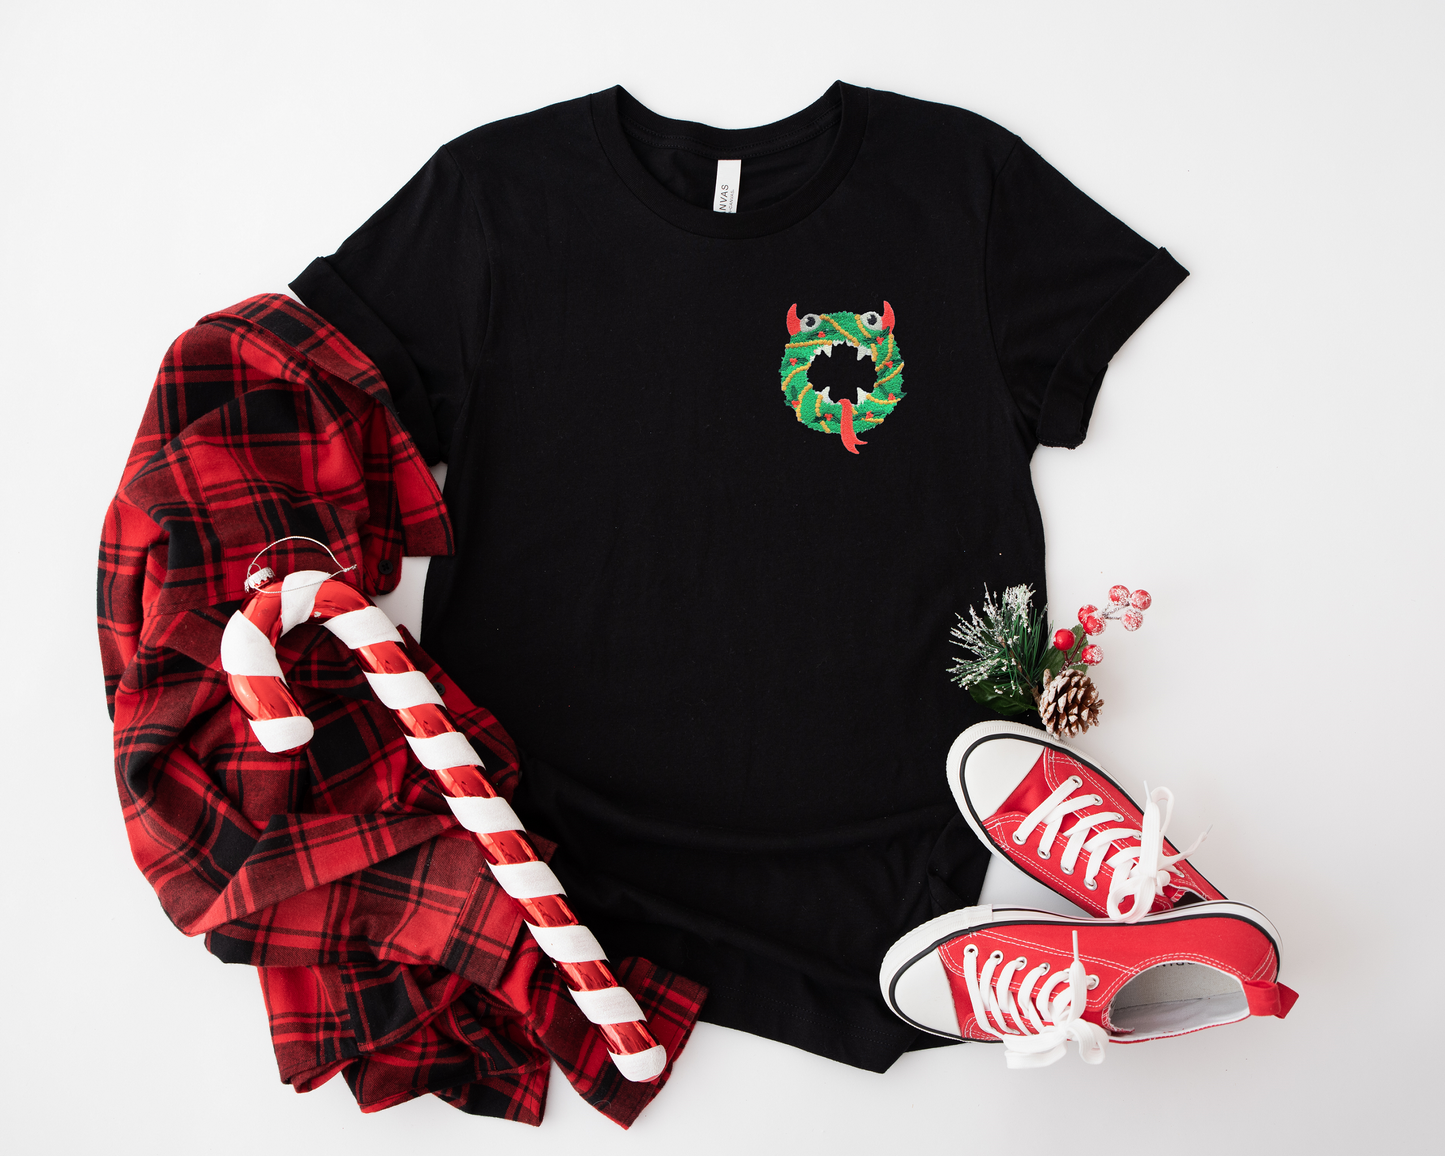 Monster Christmas Wreath Embroidered Adult Unisex Shirt